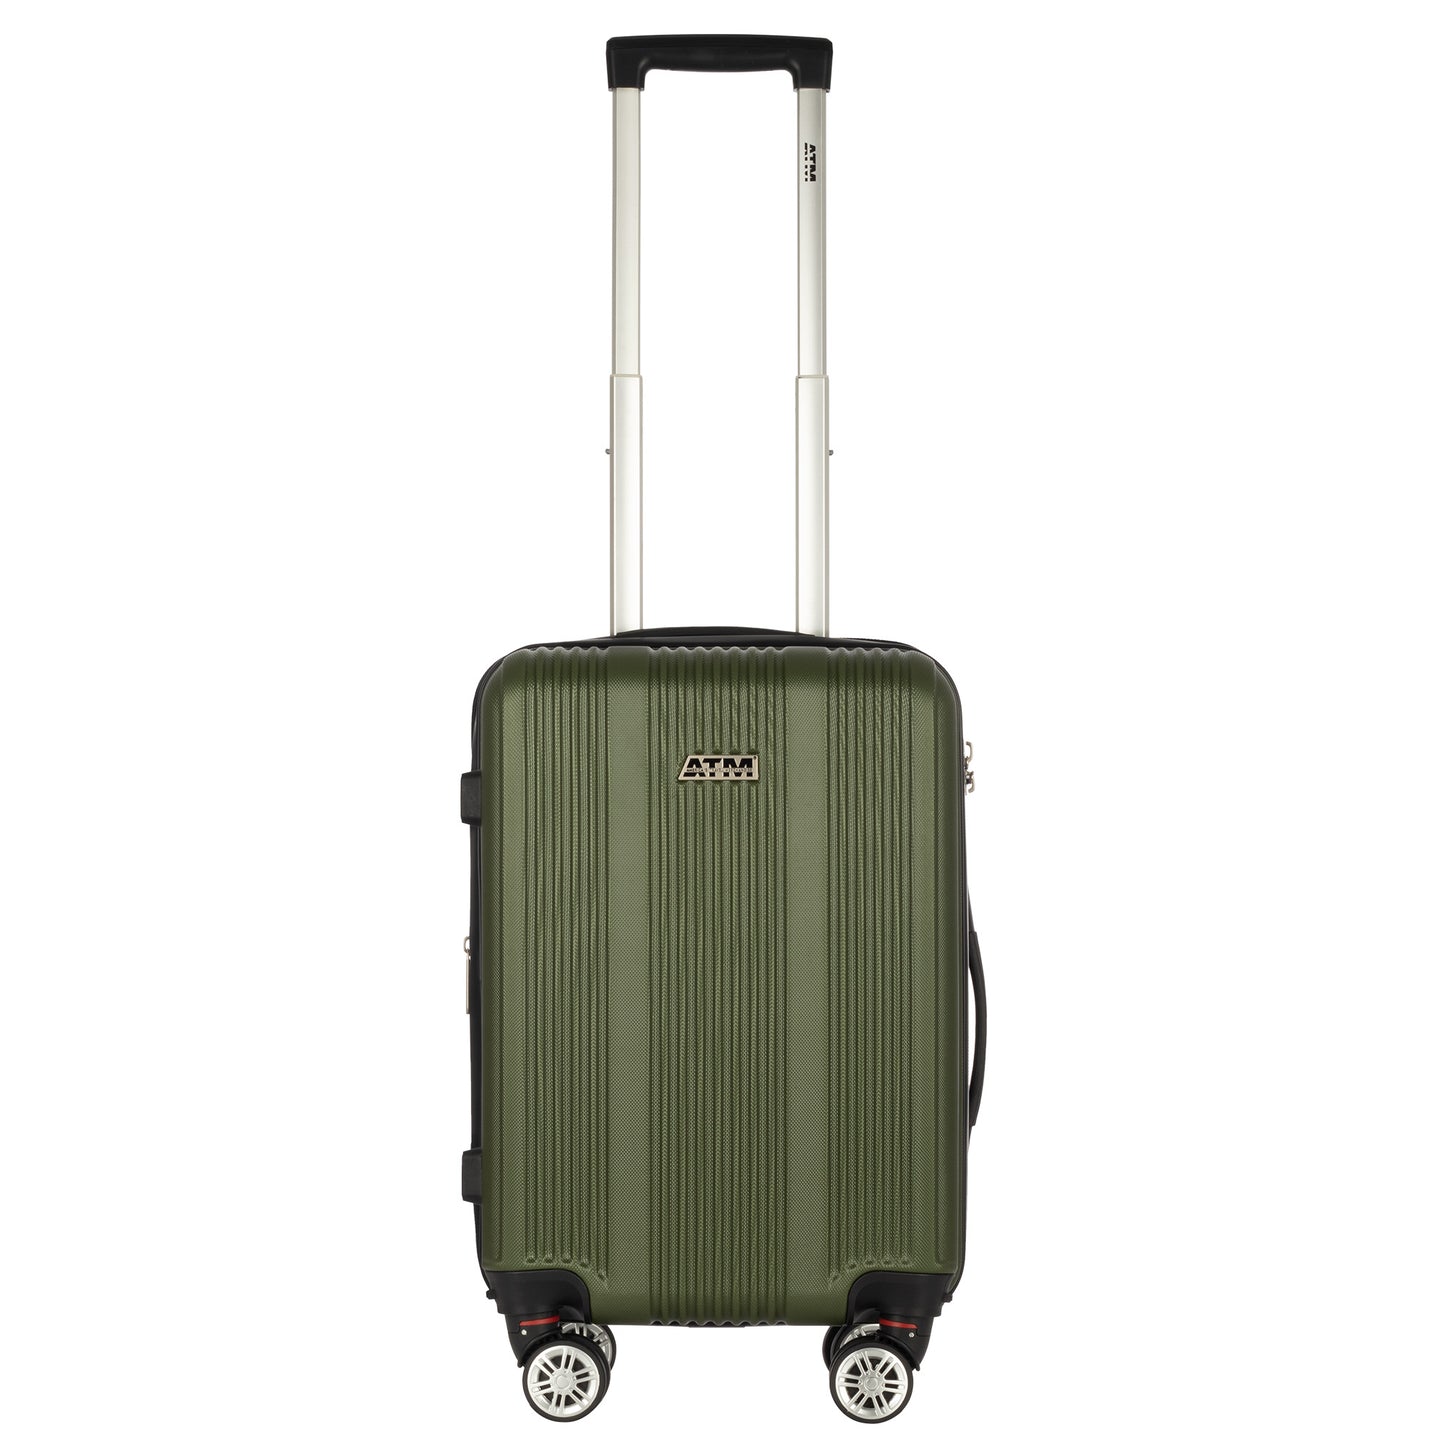 Hardhead Luggage 4 Piece Set (18/19/20/21")  Tactic Collection Green For Airplane Cabin